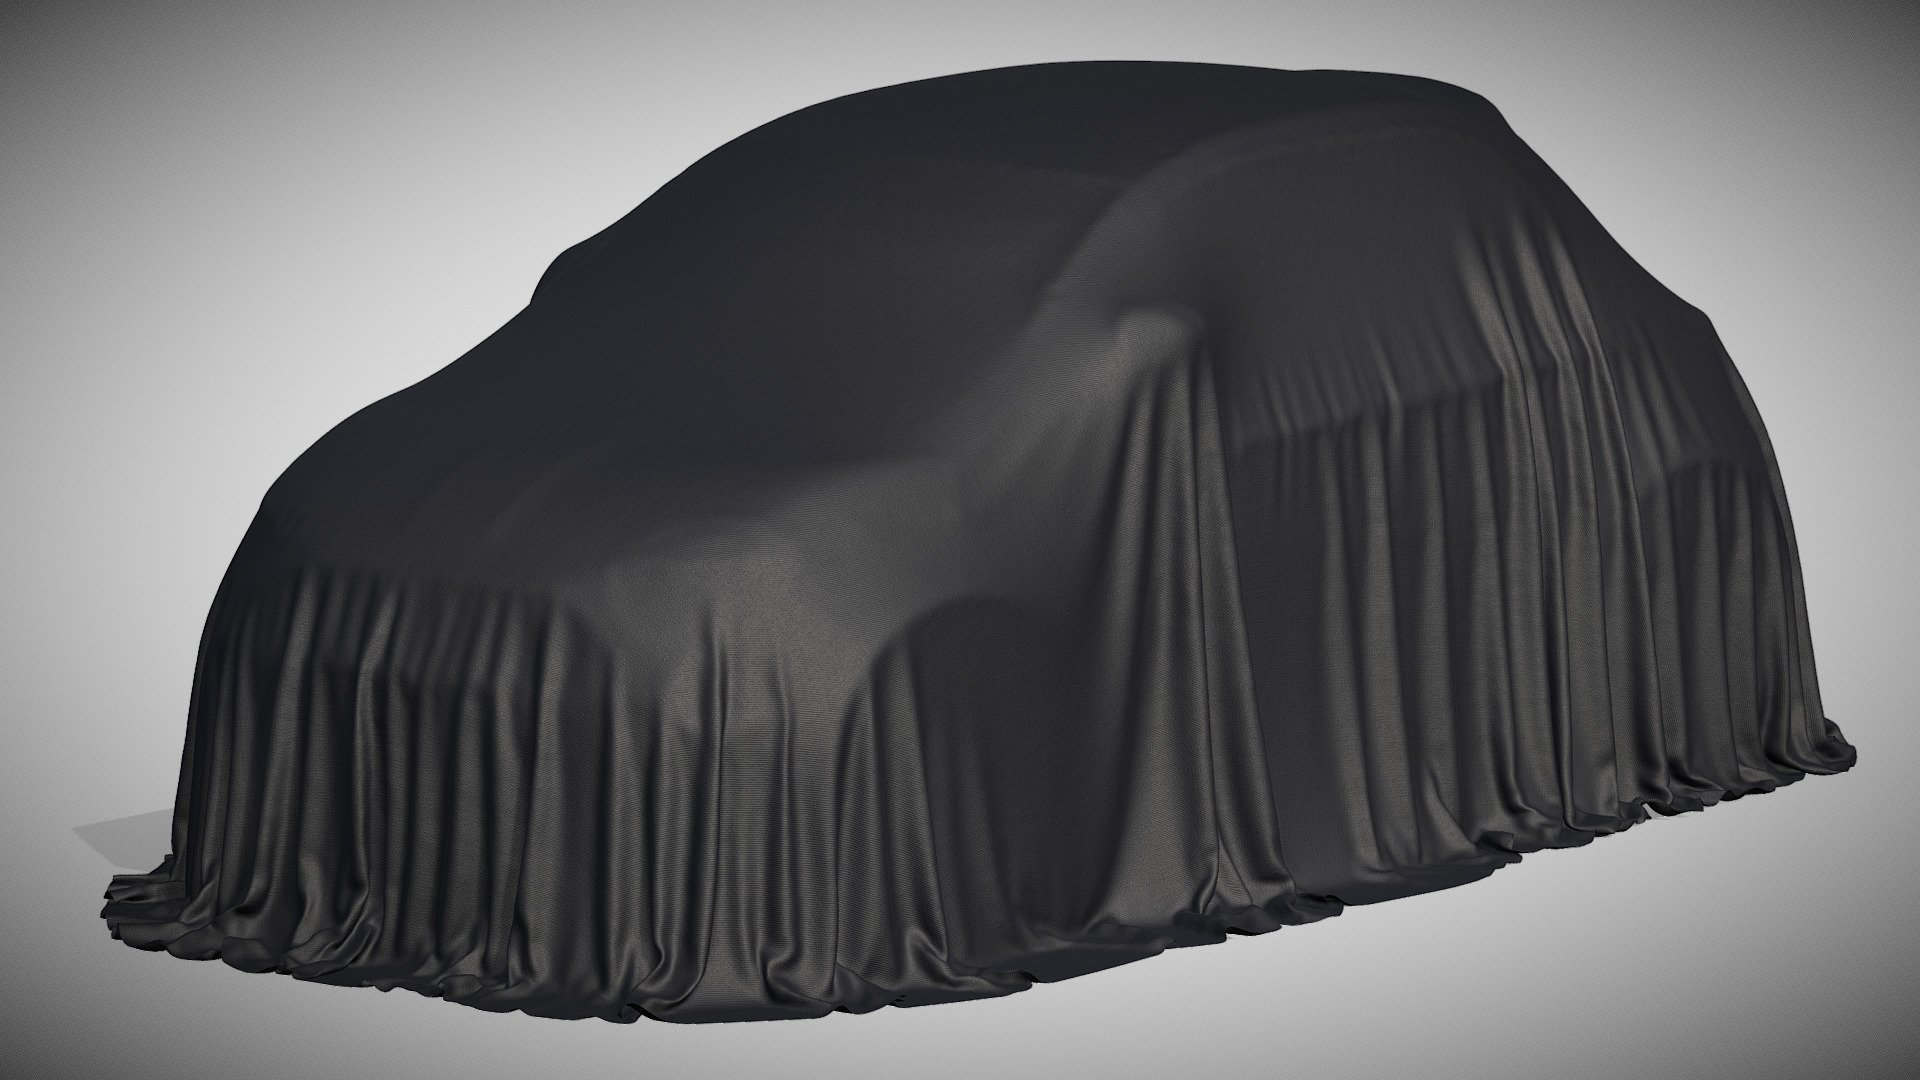 Car Cover - compact car

Cover car an auto show traditional hide and reveal ceremony textile cover props. Cover car a manufacturer or dealer motor show traditional fabric cover drapery. For auto show ceremonies, car show ceremonies, manufacturing of the vehicles, unusual future cars, transportation of the future, modern vehicles, modern vehicles engineering, concepts or comfortable vehicles, car machinery, new car presentations, contemporary vehicles, and future auto transportation engineering documentary or educational projects.

Clean geometry Light weight model, yet completely detailed for HI-Res renders. Use for movies, Advertisements or games

Corona render and materials

All textures include in *.rar files

Lighting setup is not included in the file! - Car Cover - compact car - Buy Royalty Free 3D model by zifir3d 3d model